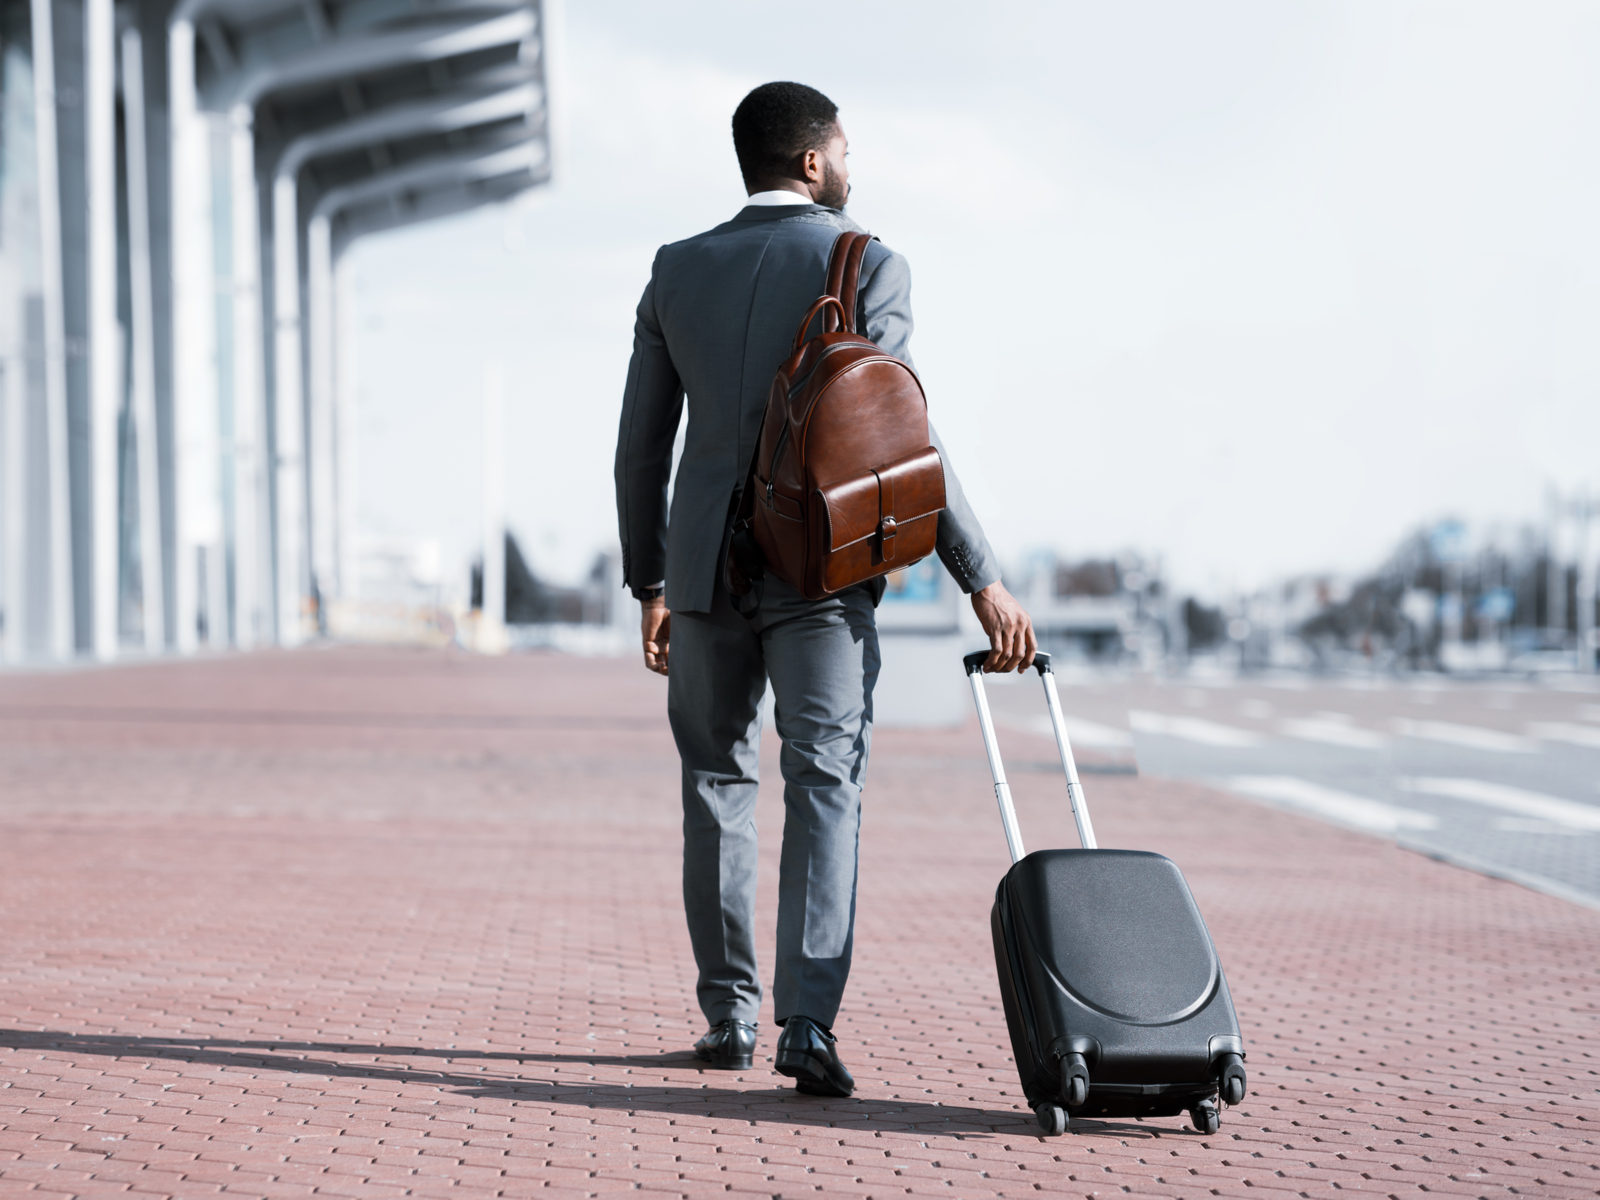 Man in a suit pulling a suitcase and wearing one of the best business travel backpacks that's leather and brown in color